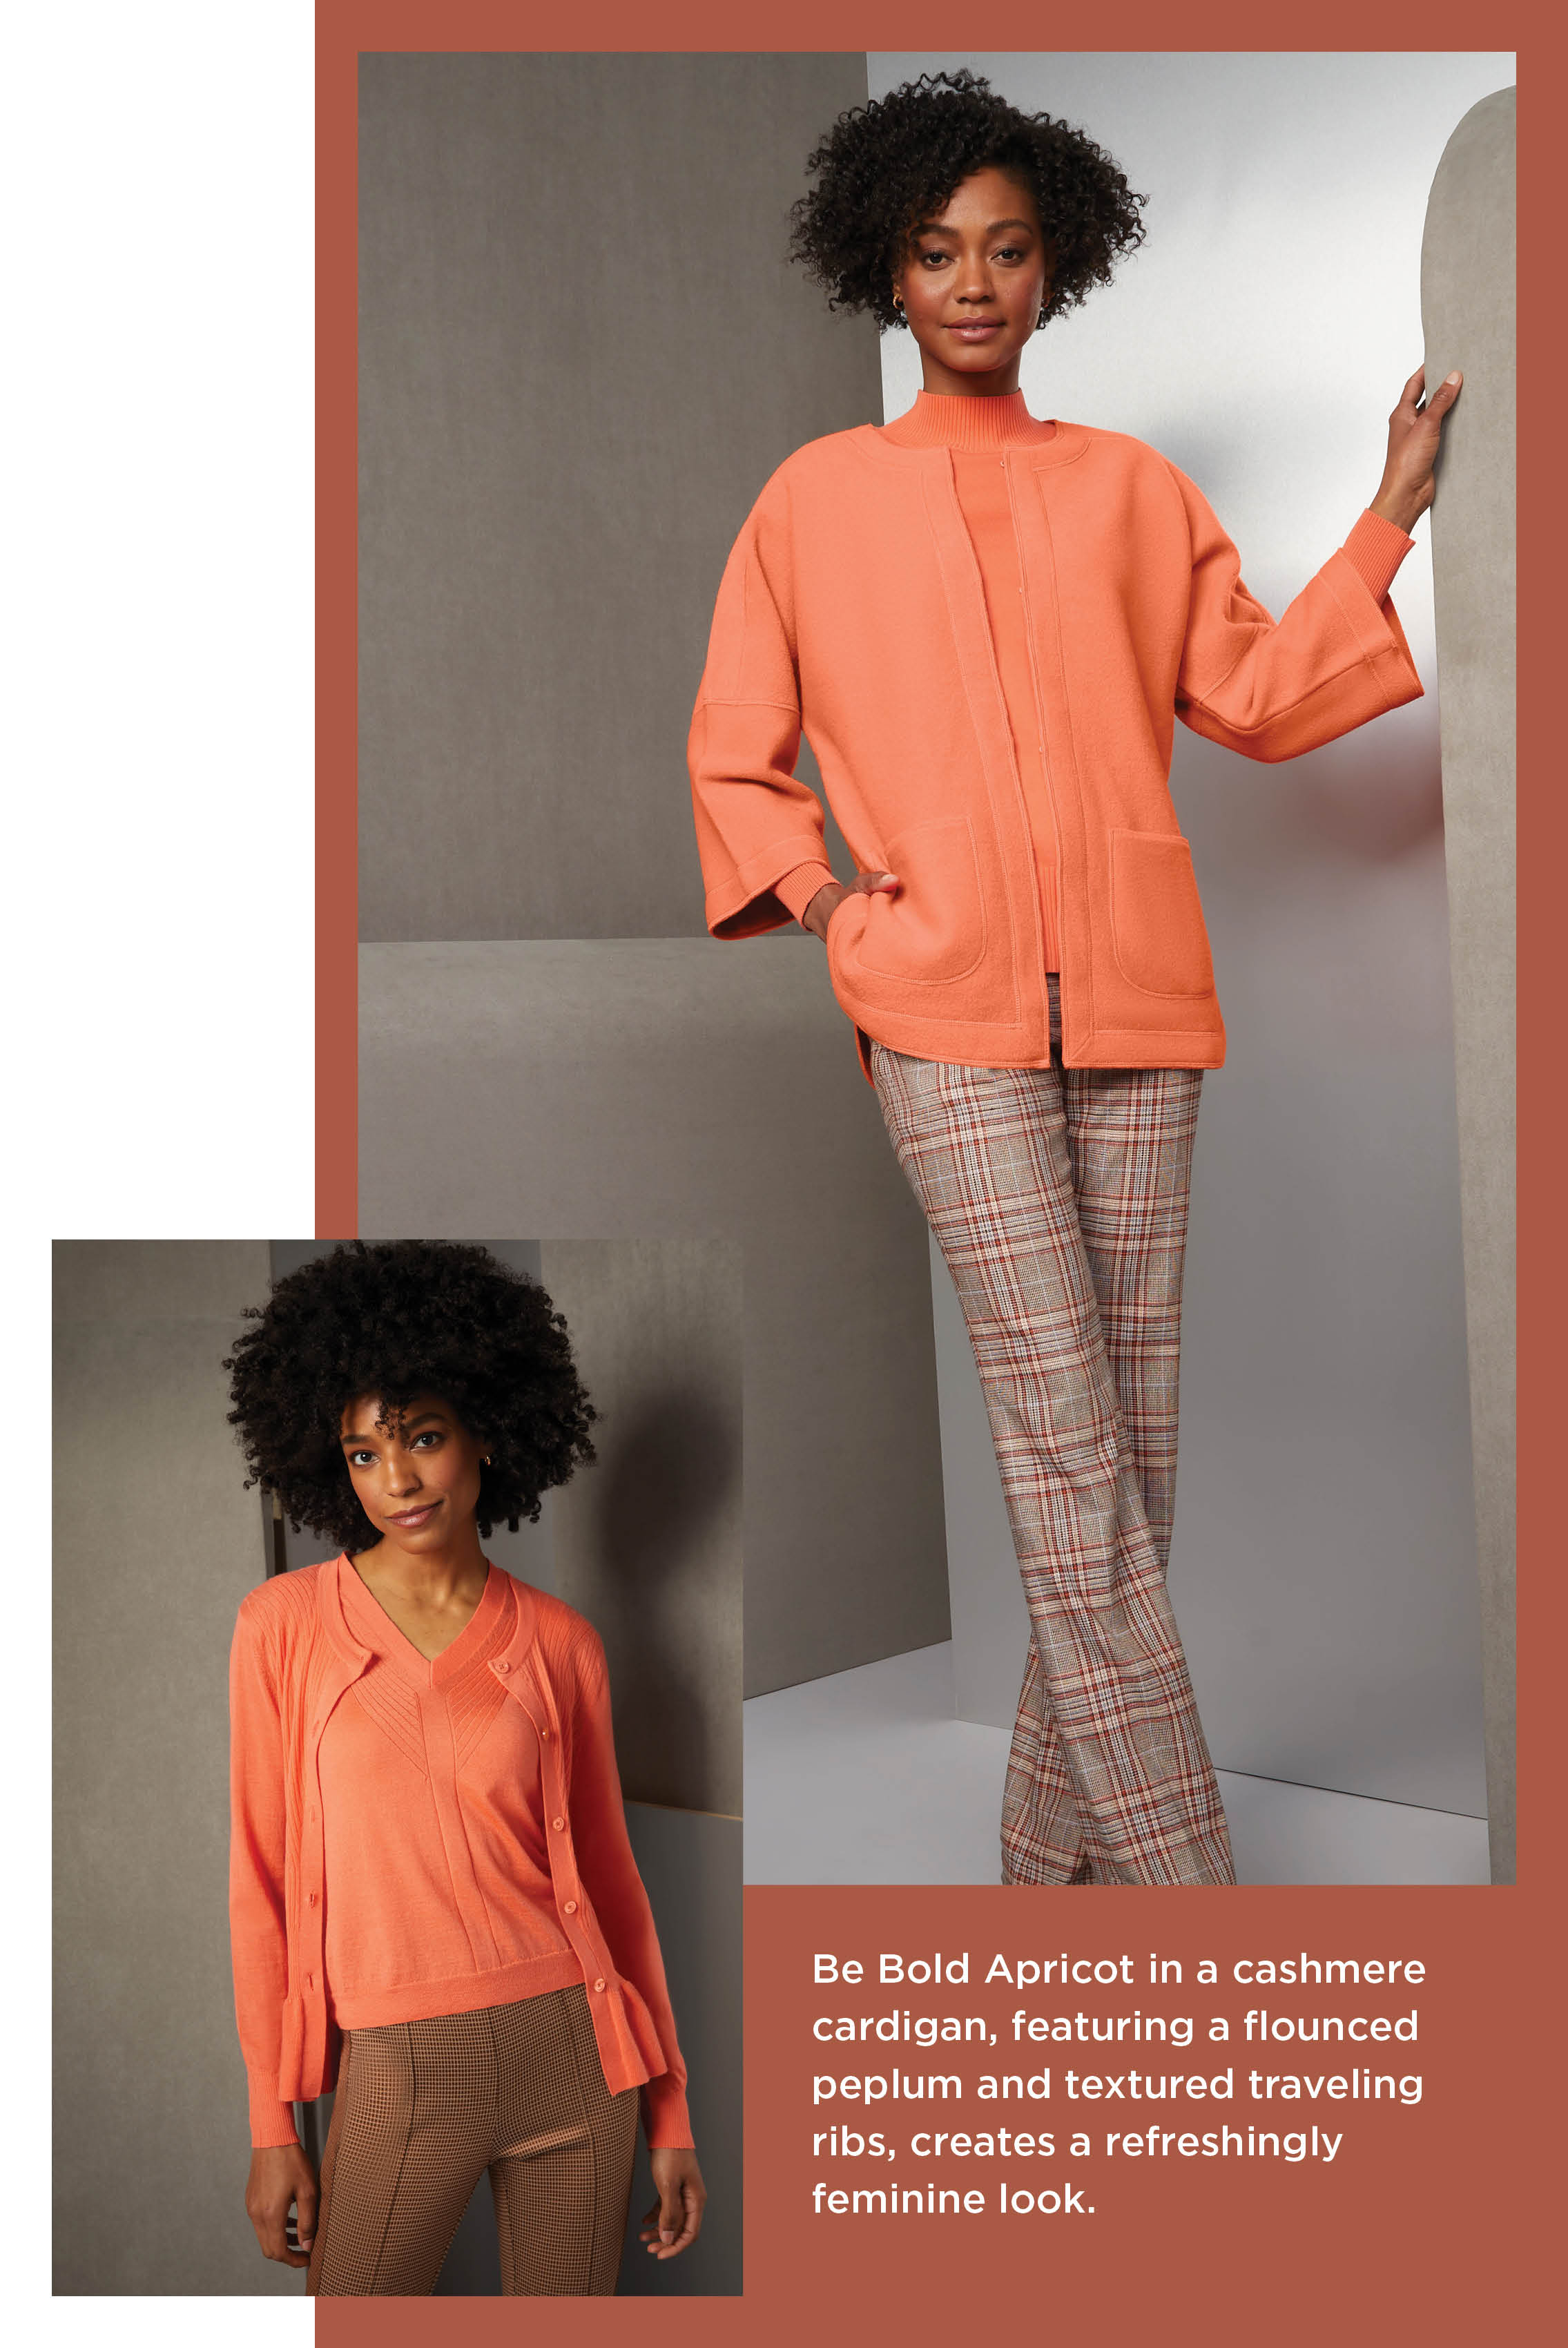 Pattern plays a role in this upscale ensemble. The bold apricot cashmere twinset accents outfits with color, traveling ribs, and a feminine peplum. Equally complex are these stretch satin jacquard pants in a mini-oval pattern.